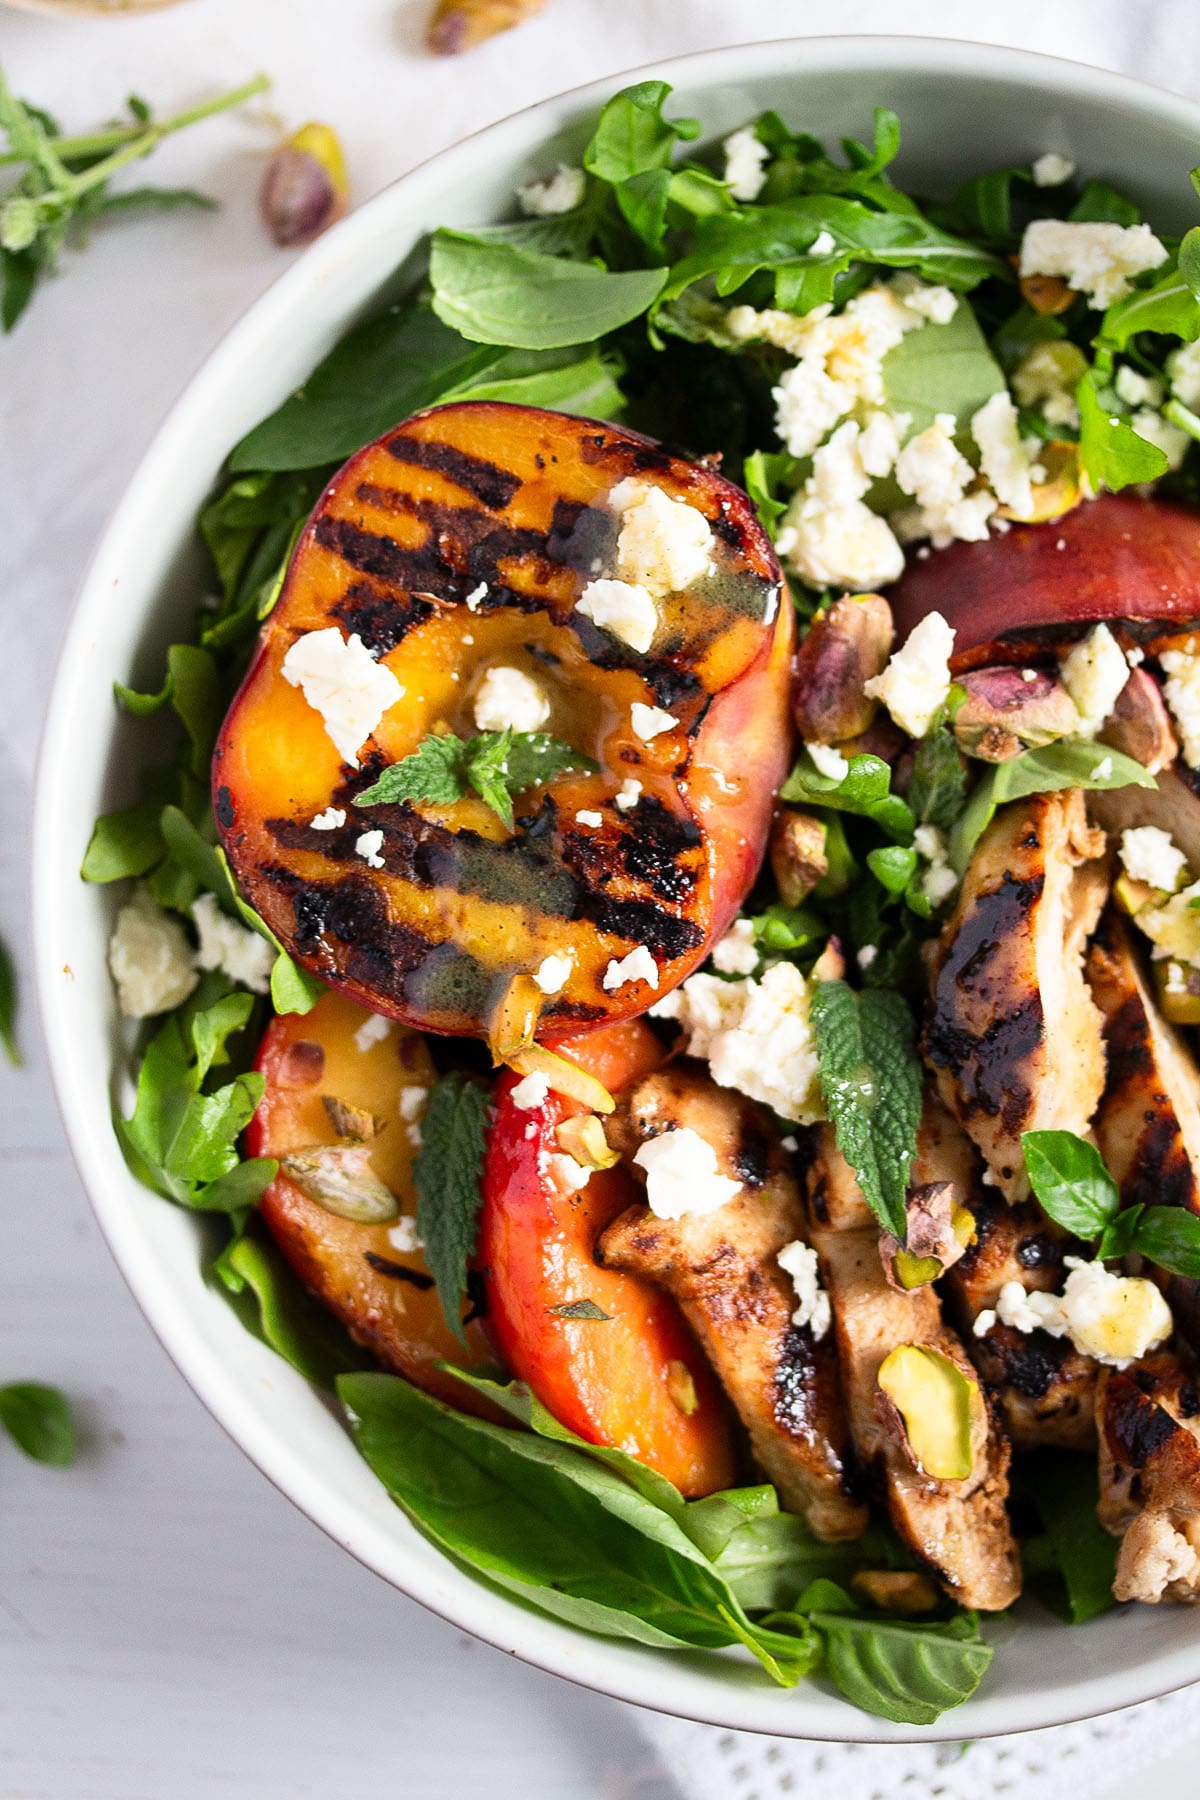 grilled peach salad with chicken breast, arugula, feta and pistachios.